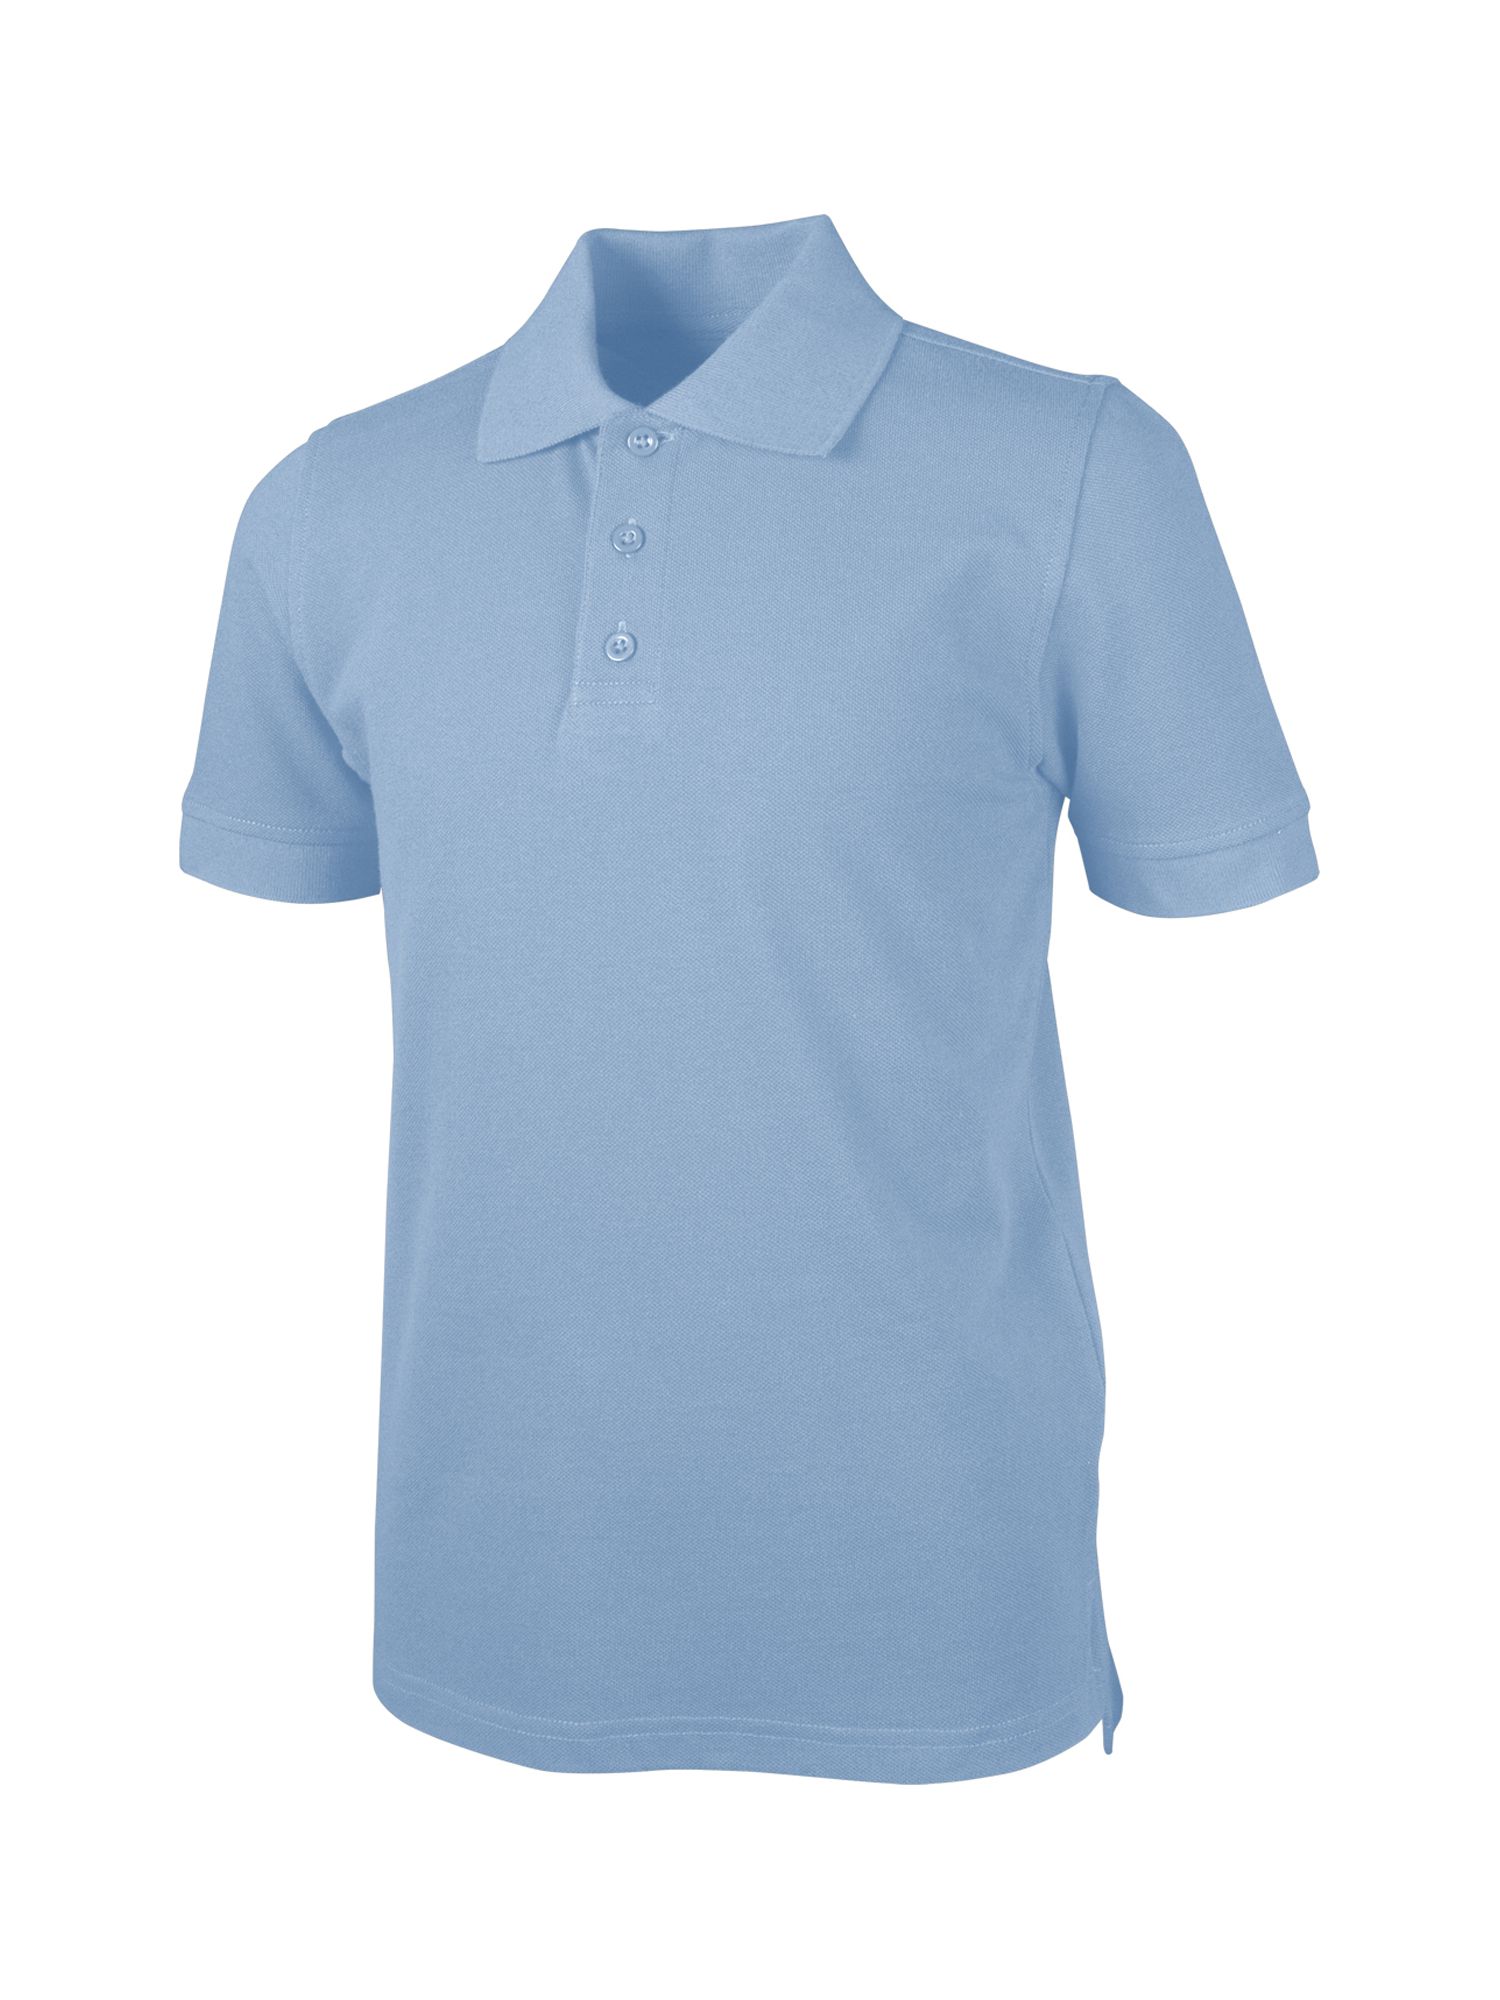 Real School Uniforms Short Sleeve Pullover Collared Regular Polo (Big Boys or Little Boys), 1 Pack - image 1 of 3